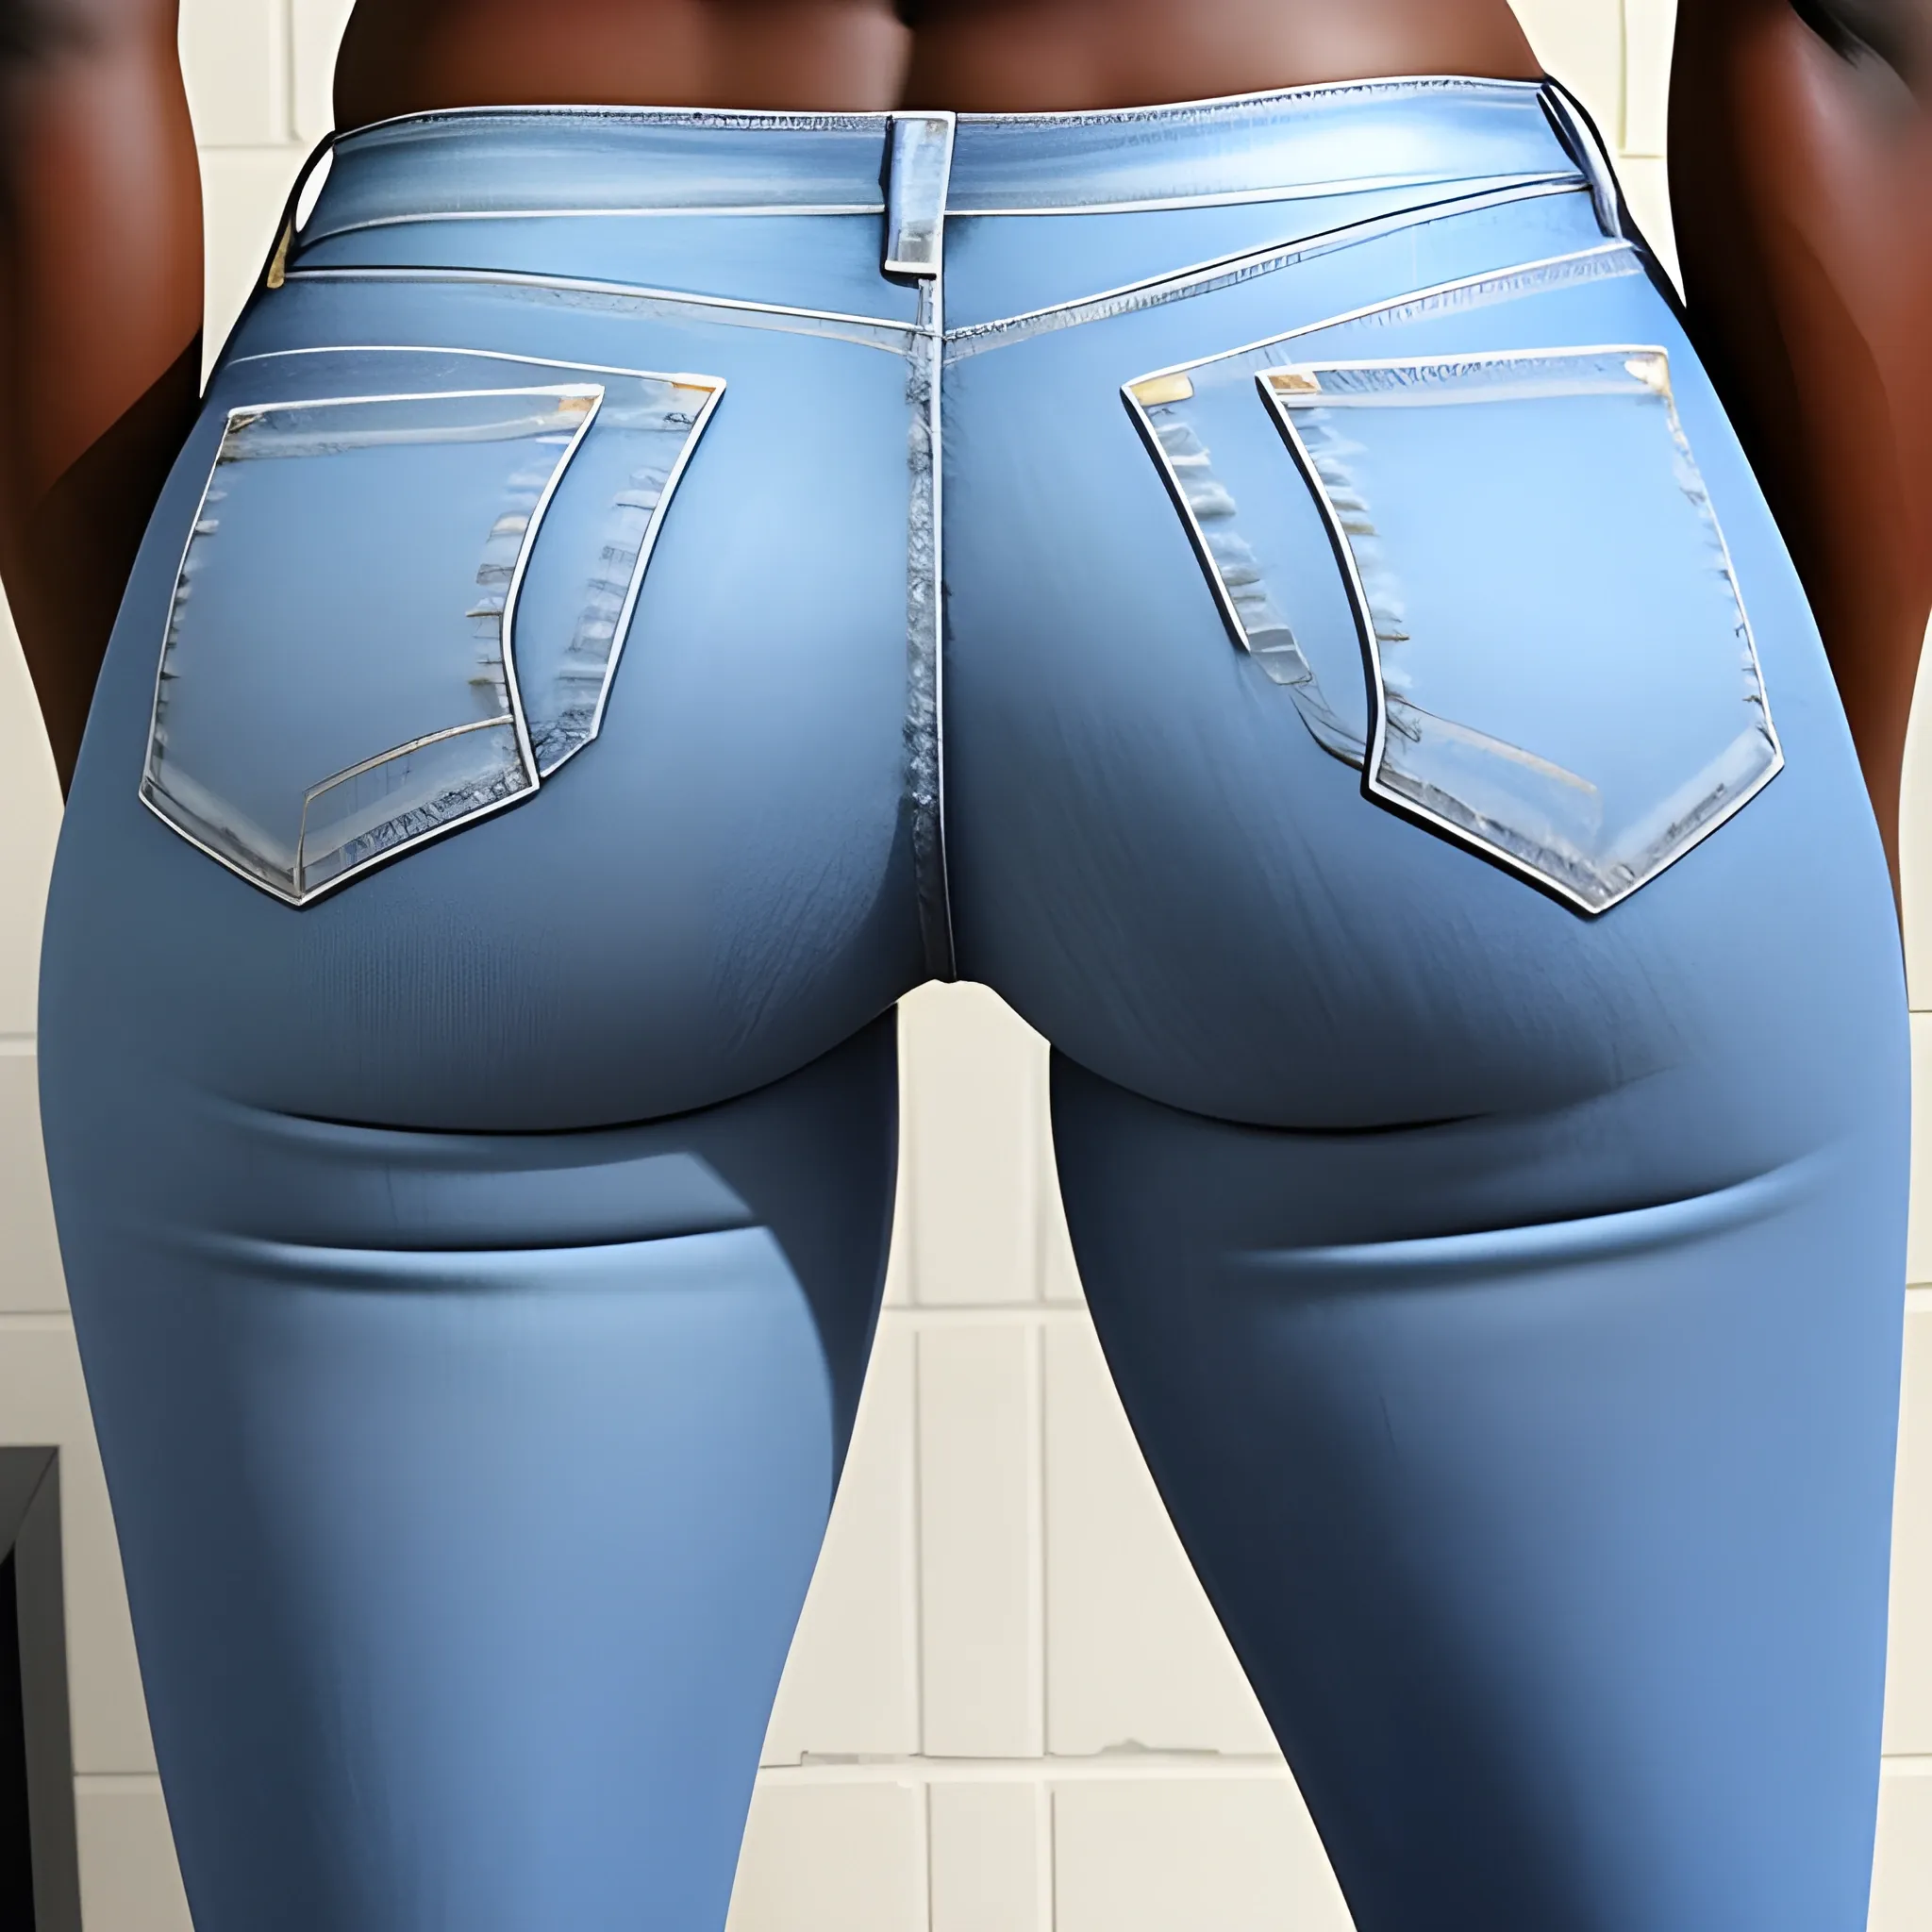 slim african girl with normal legs narrow hips wearing jeans